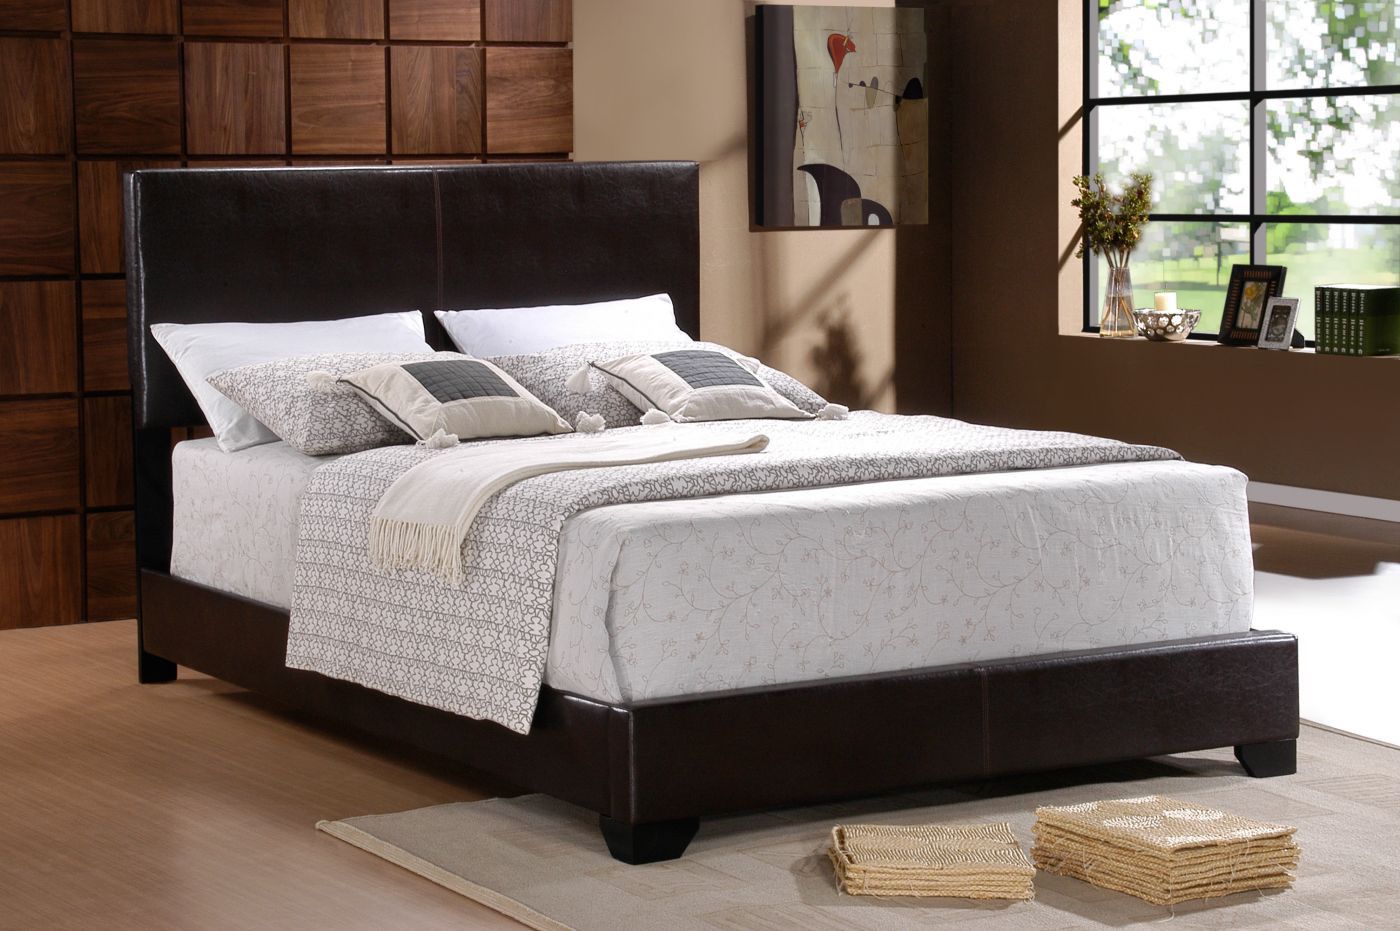 Brand new king size package bed frame includes king size mattress sets